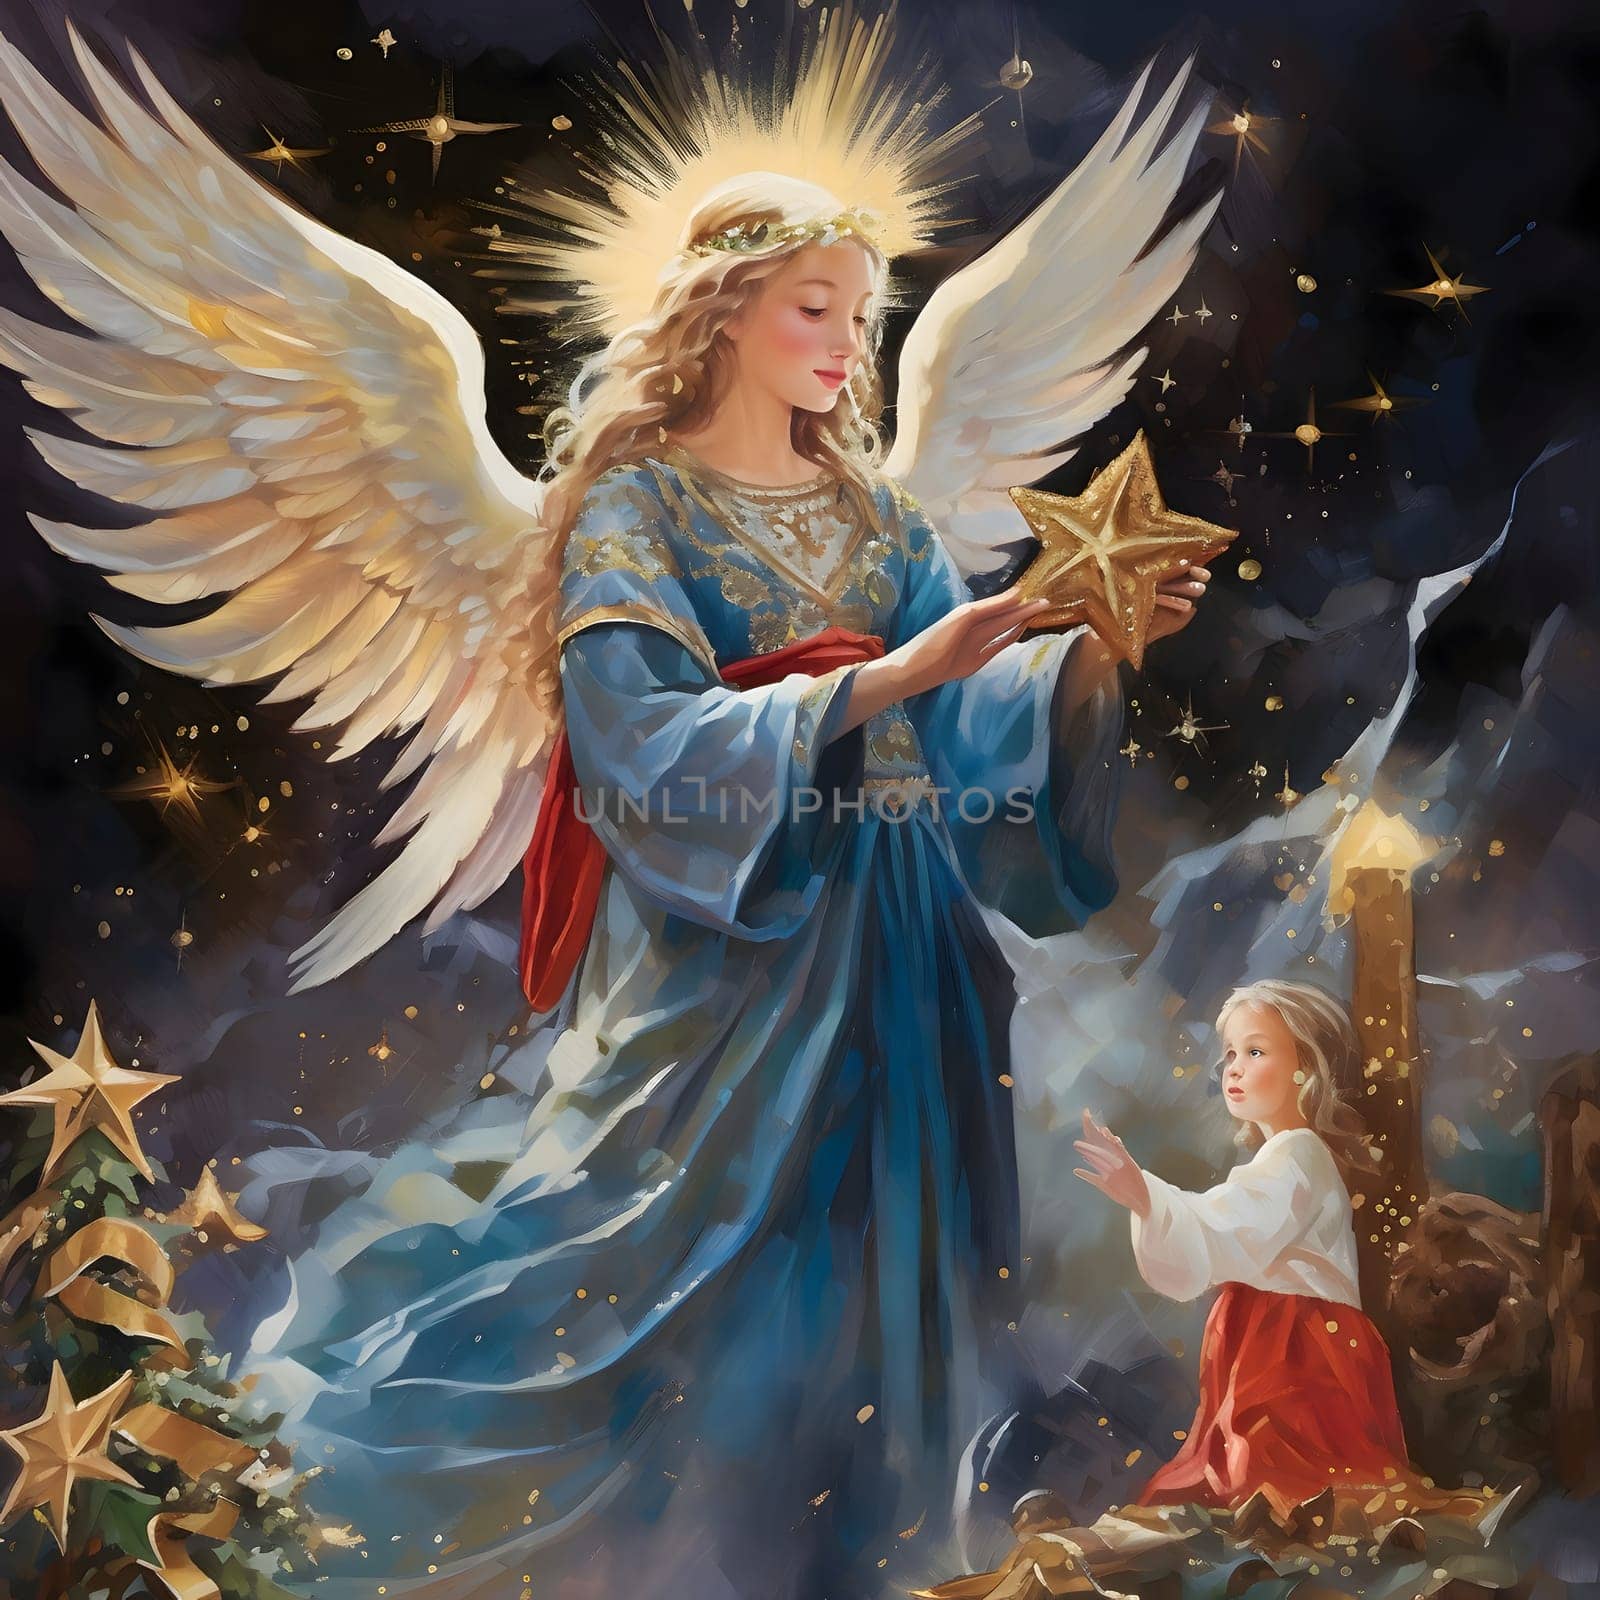 Angel in the form of a girl with a star in her hands in front of a little girl. Christmas card as a symbol of remembrance of the birth of the Savior. A time of joy and celebration.